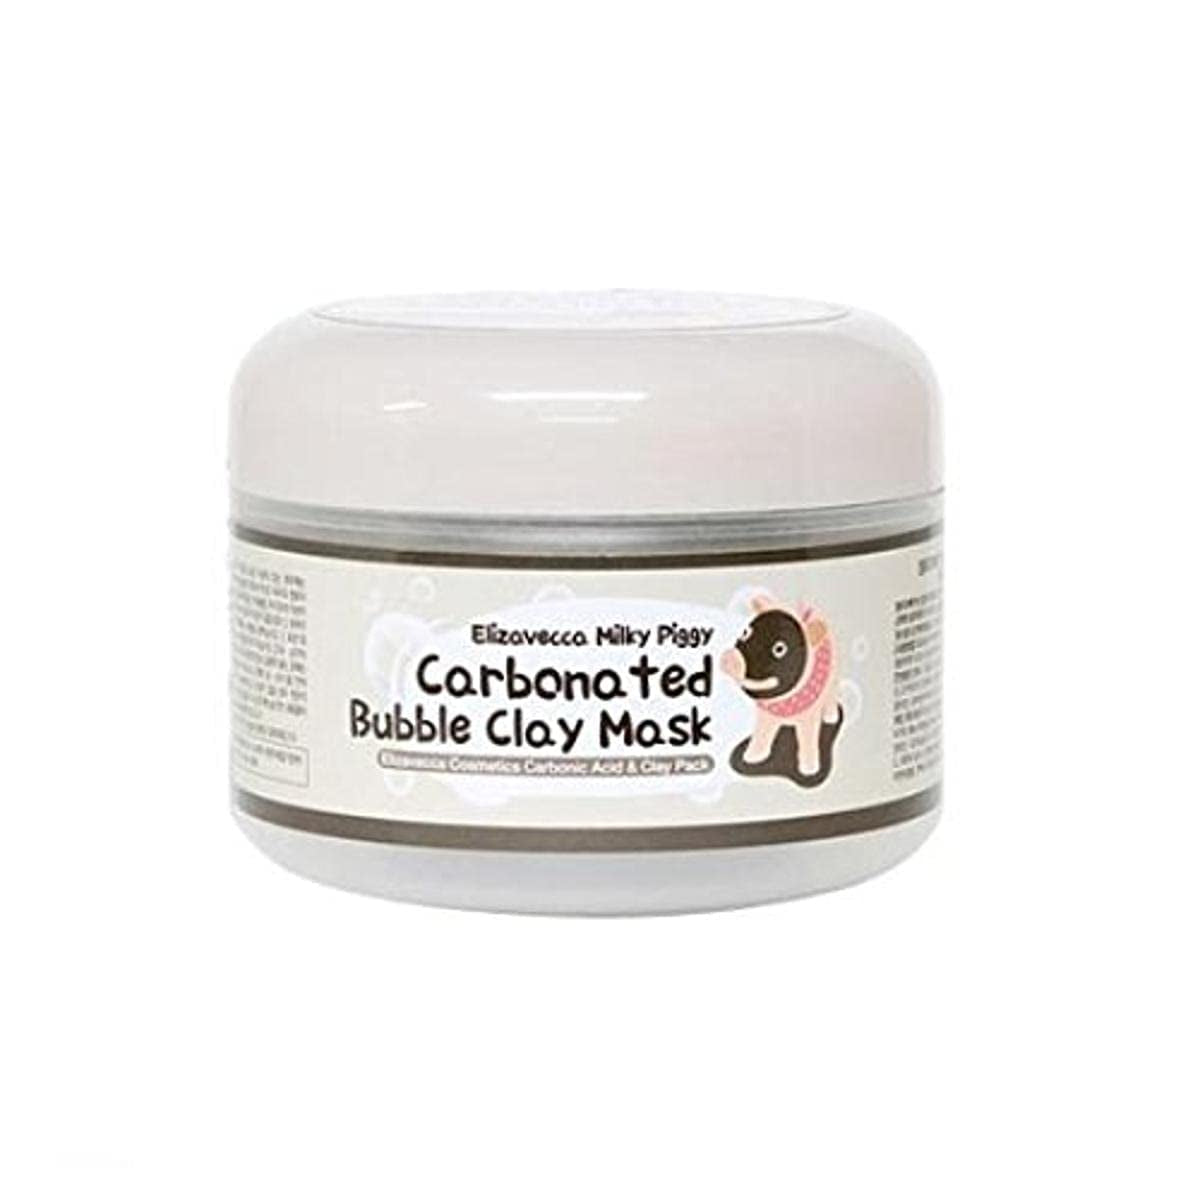  Milky Piggy Carbonated Bubble Clay Mask